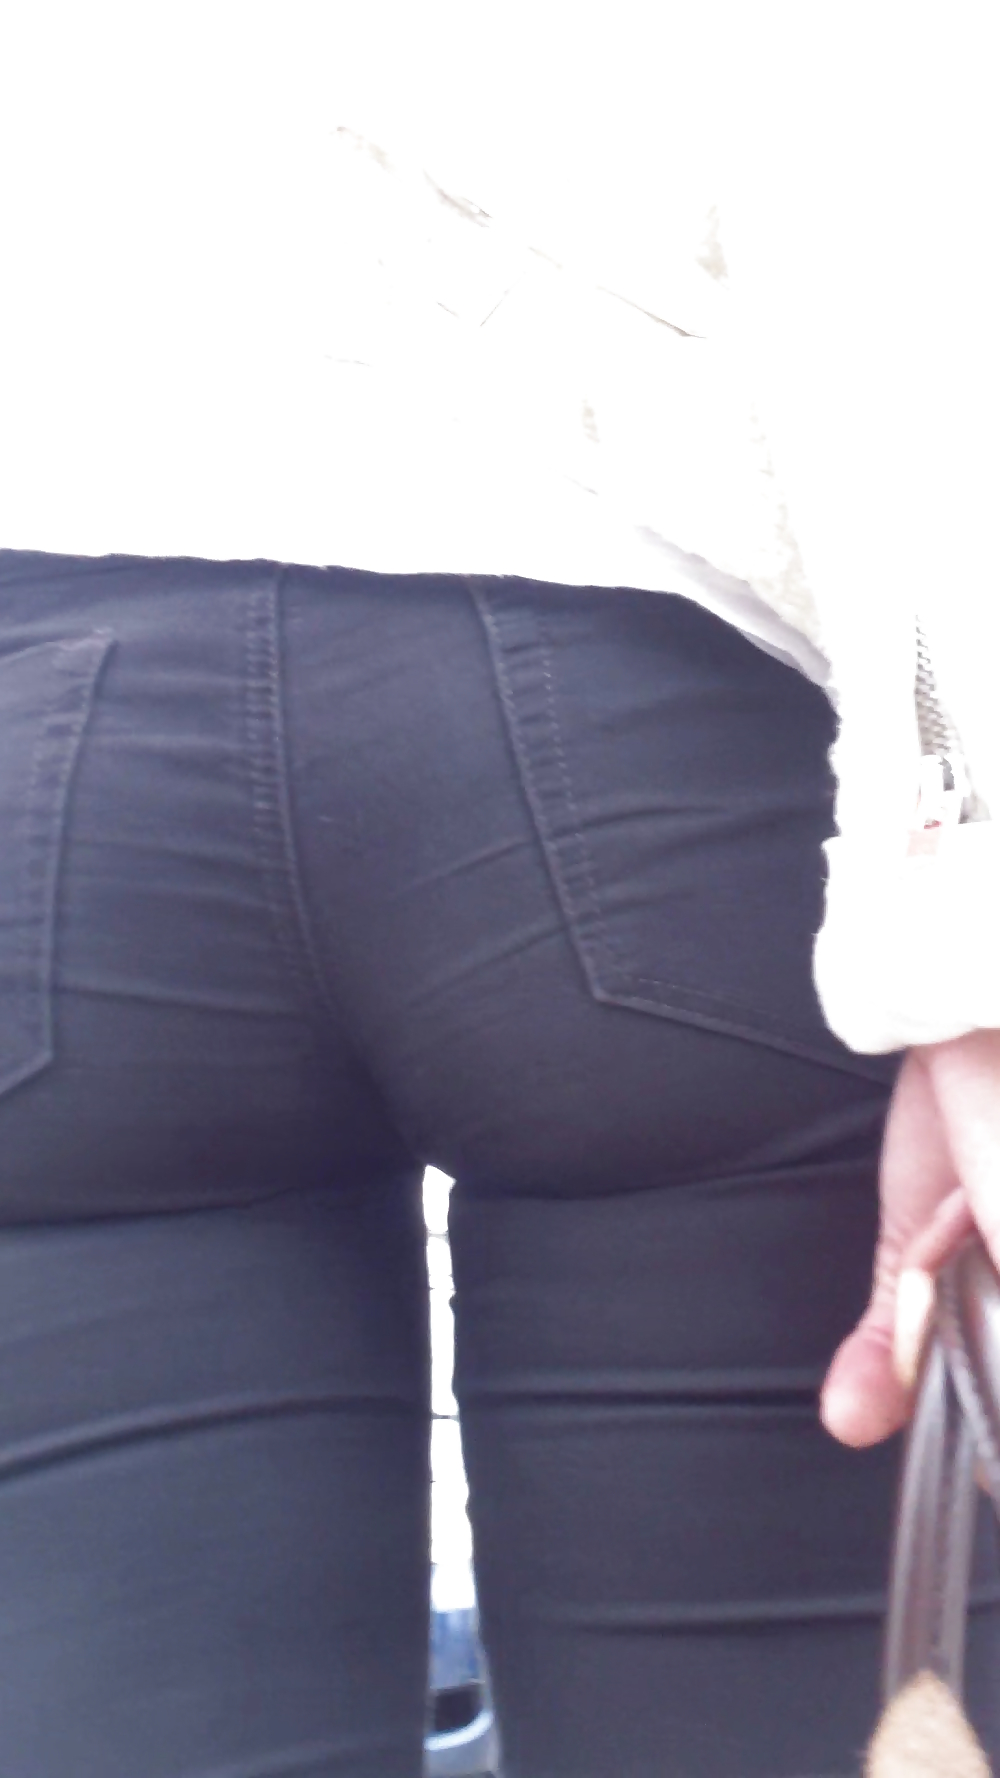 Tight teen butts & ass in jeans up close  #20660375